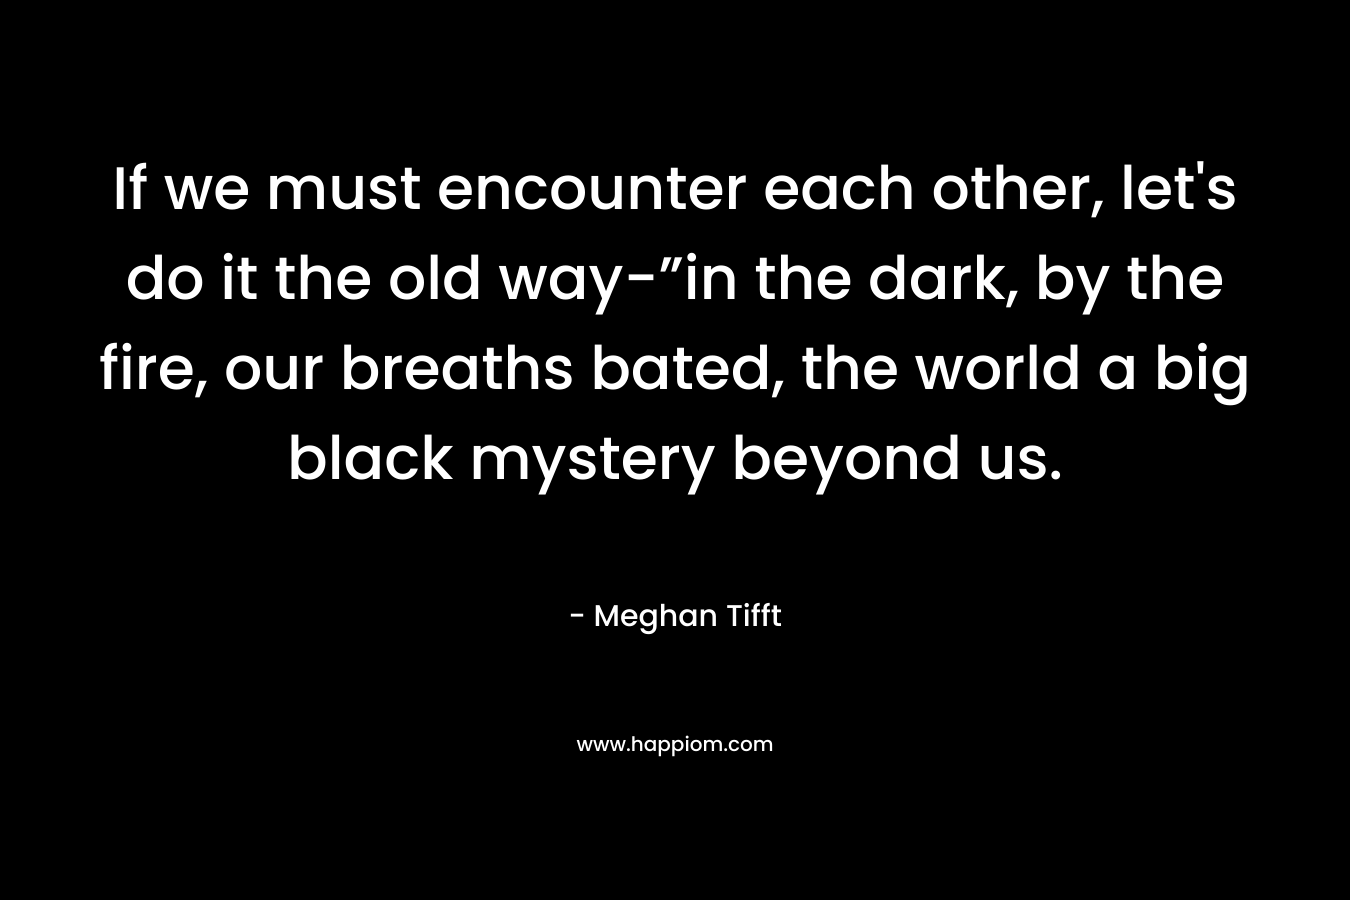 If we must encounter each other, let's do it the old way-”in the dark, by the fire, our breaths bated, the world a big black mystery beyond us.